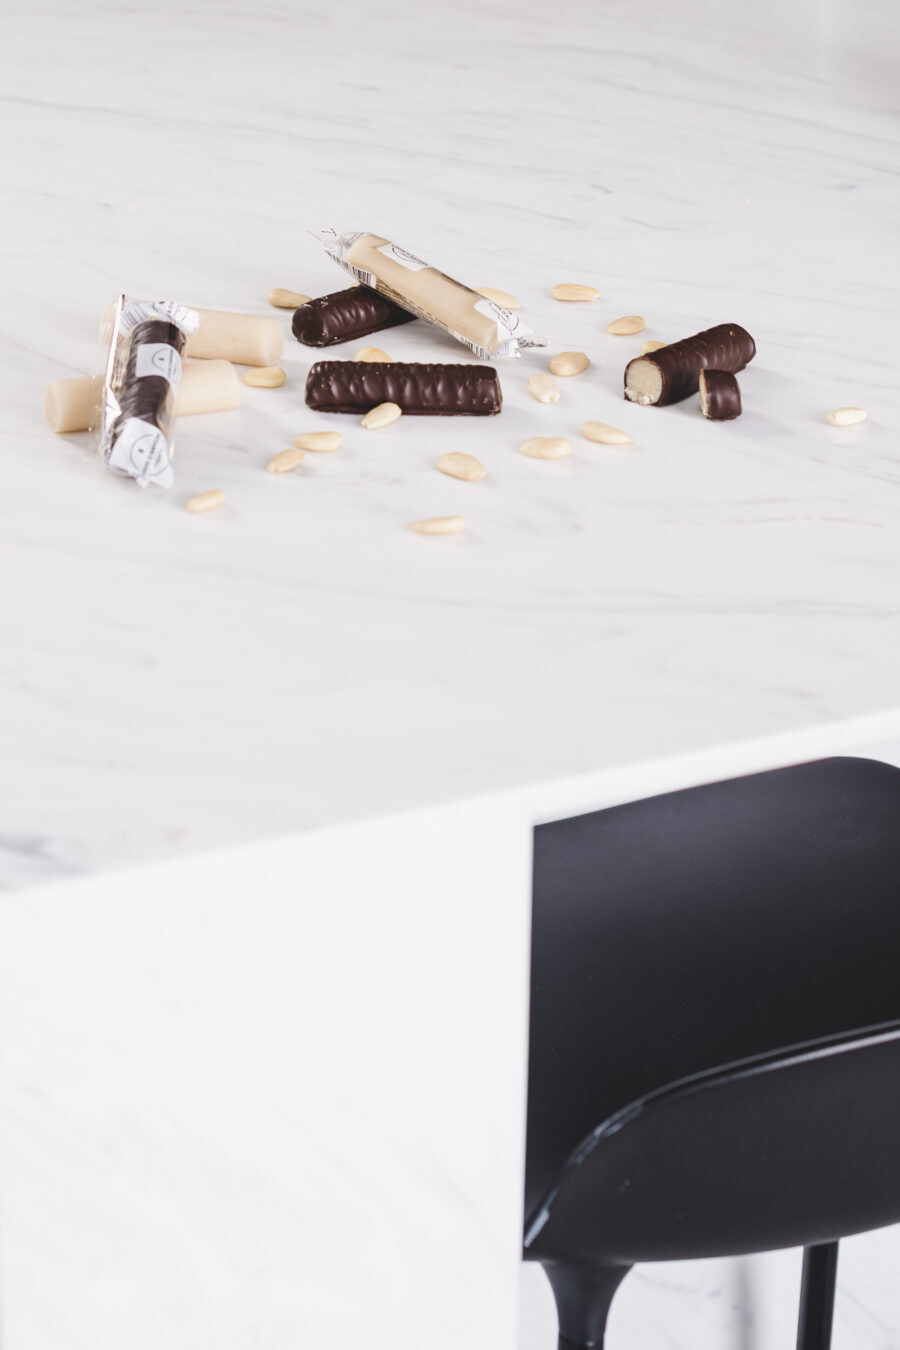 Louis D'Anvers Chocolate Covered Marzipan Lifestyle Photo 11